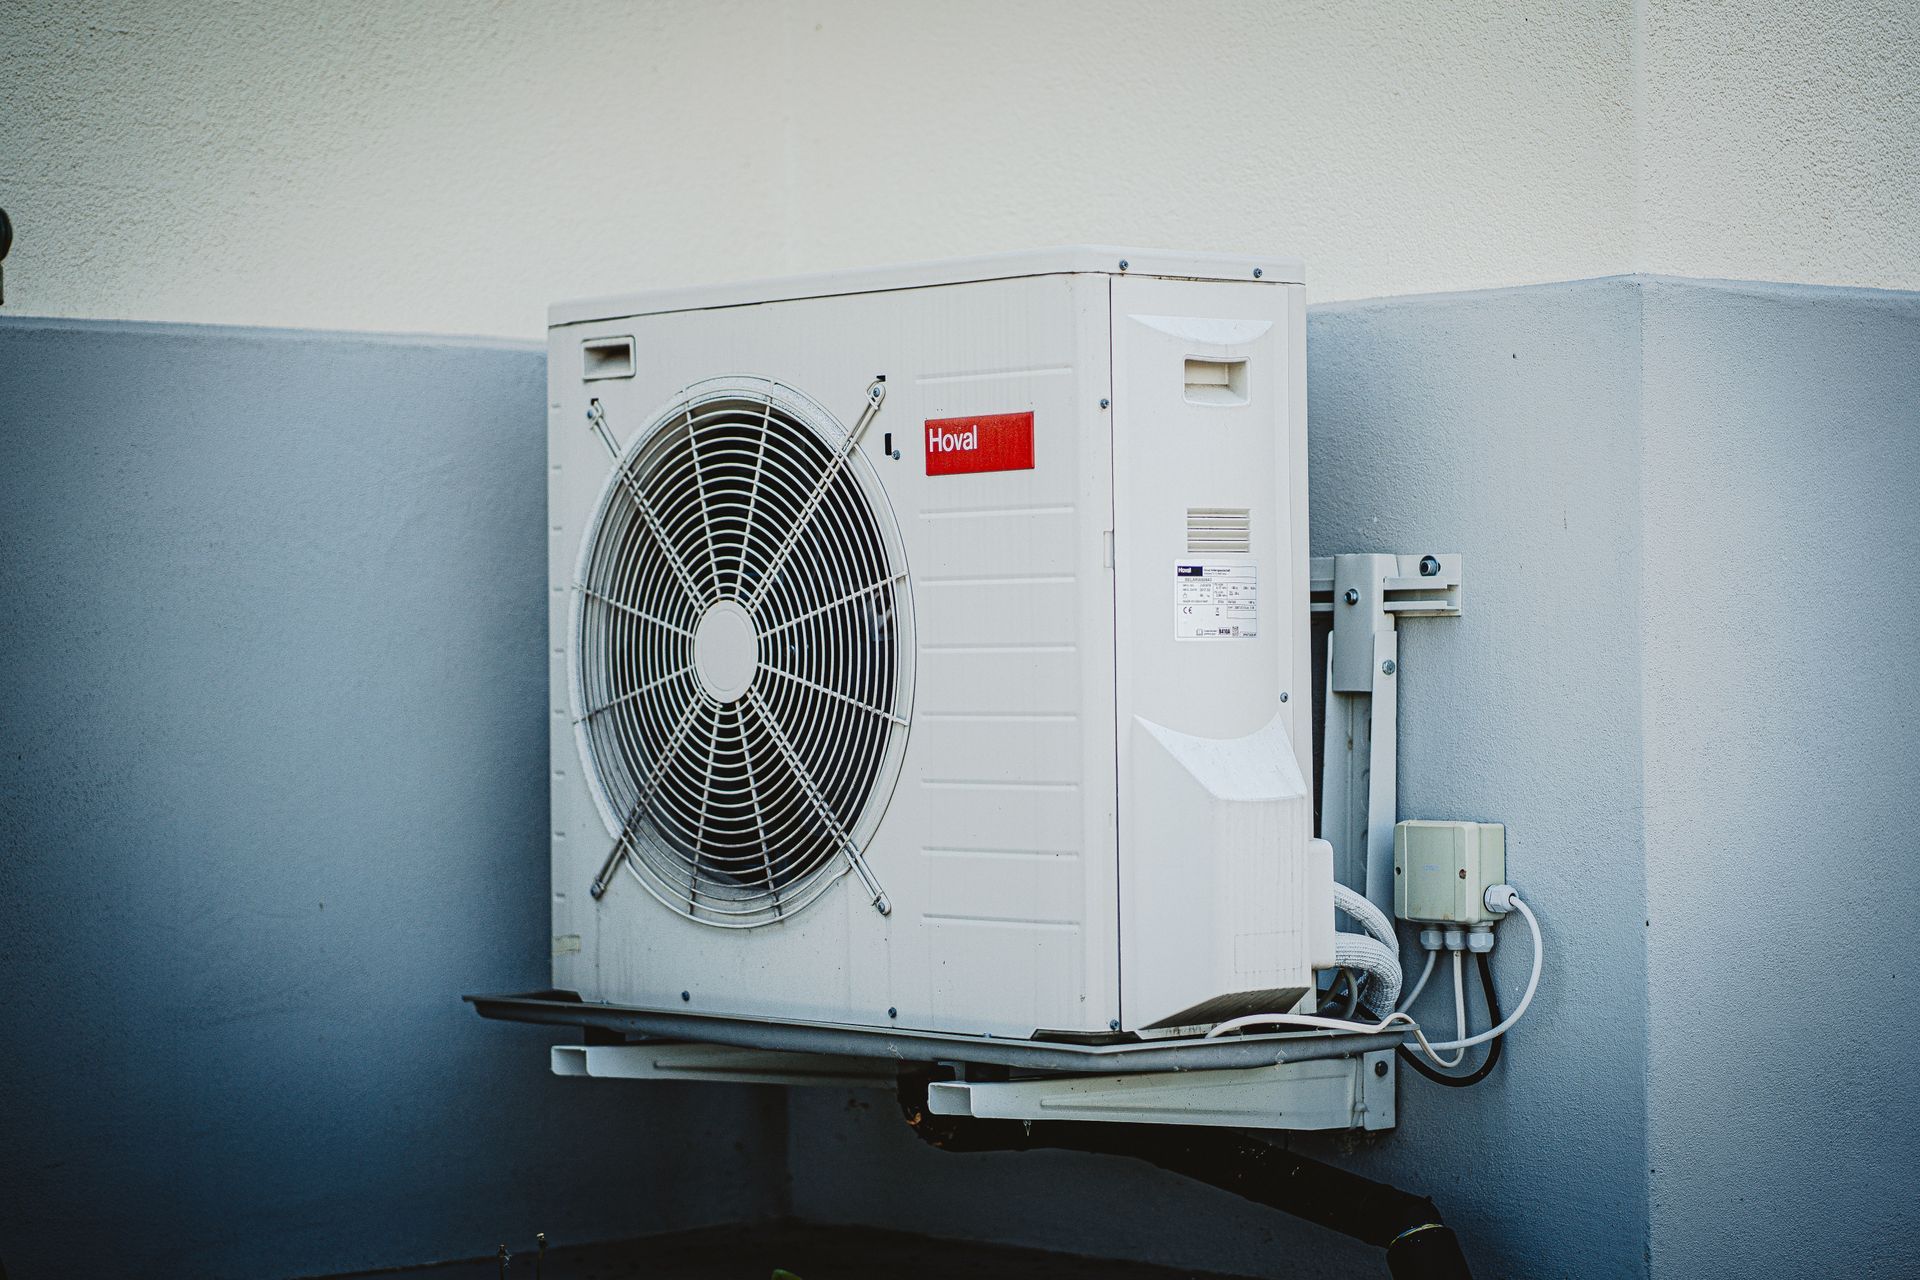 An air conditioner condenser unit mounted on an exterior wall.